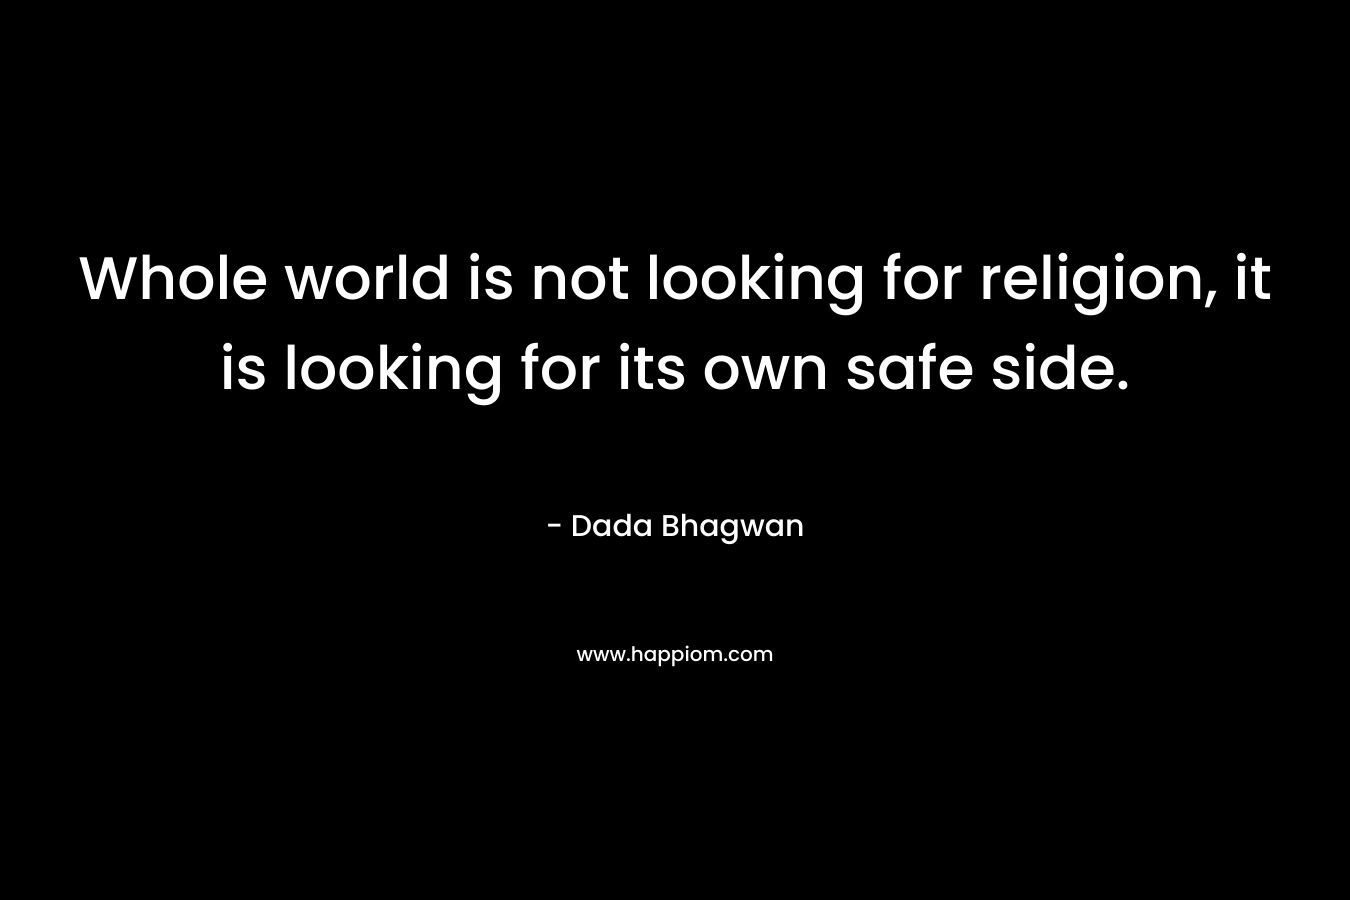 Whole world is not looking for religion, it is looking for its own safe side.